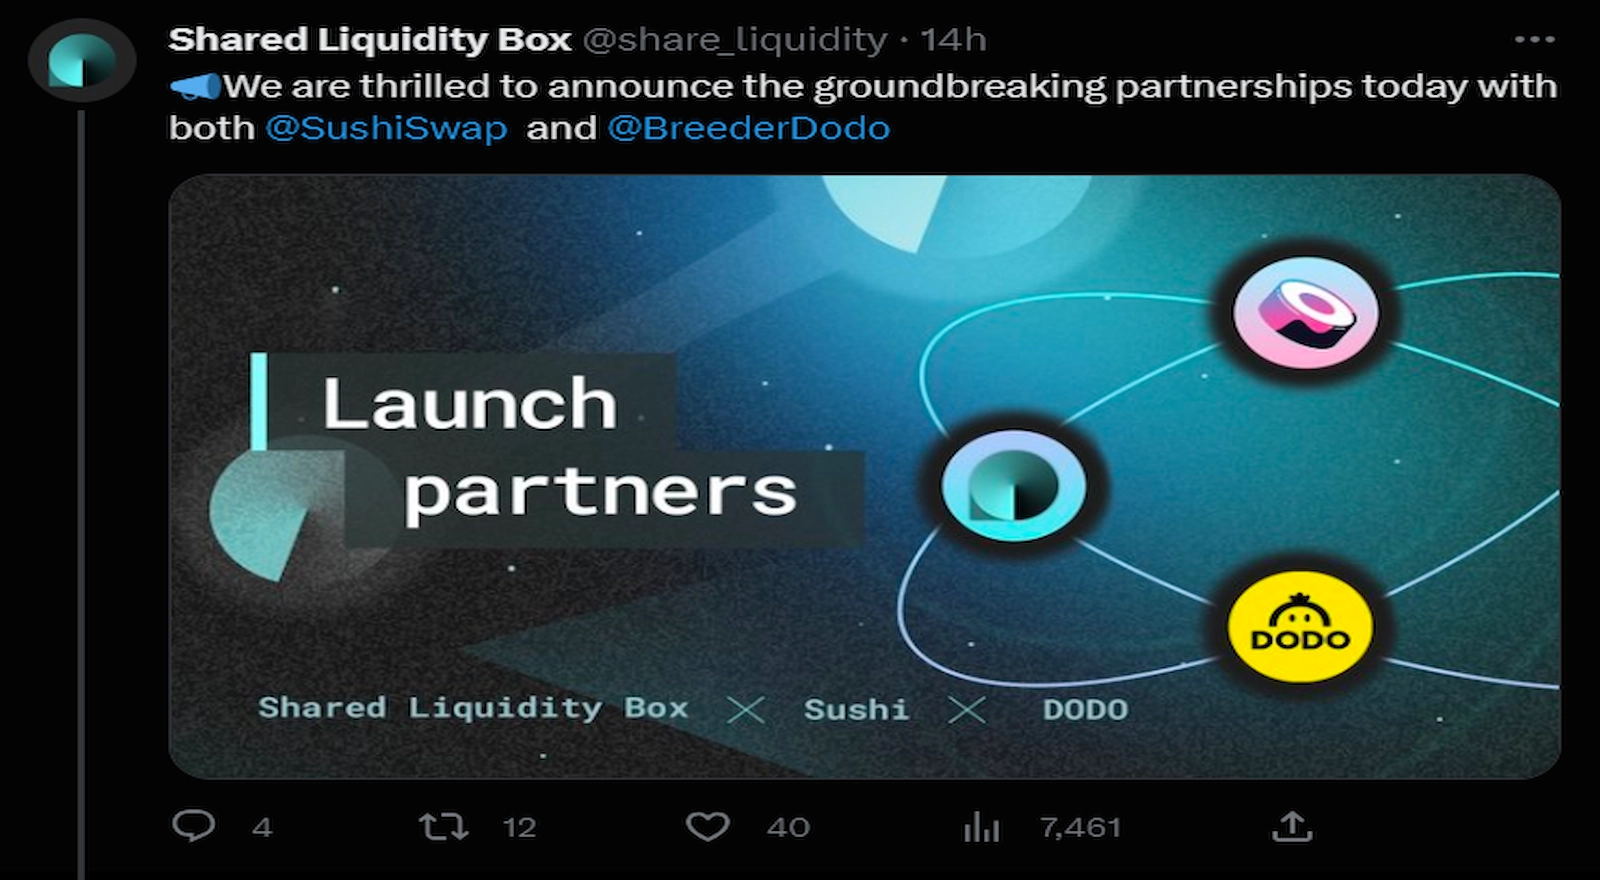 Shared Liquidity Box announced a partnership with SushiSwap